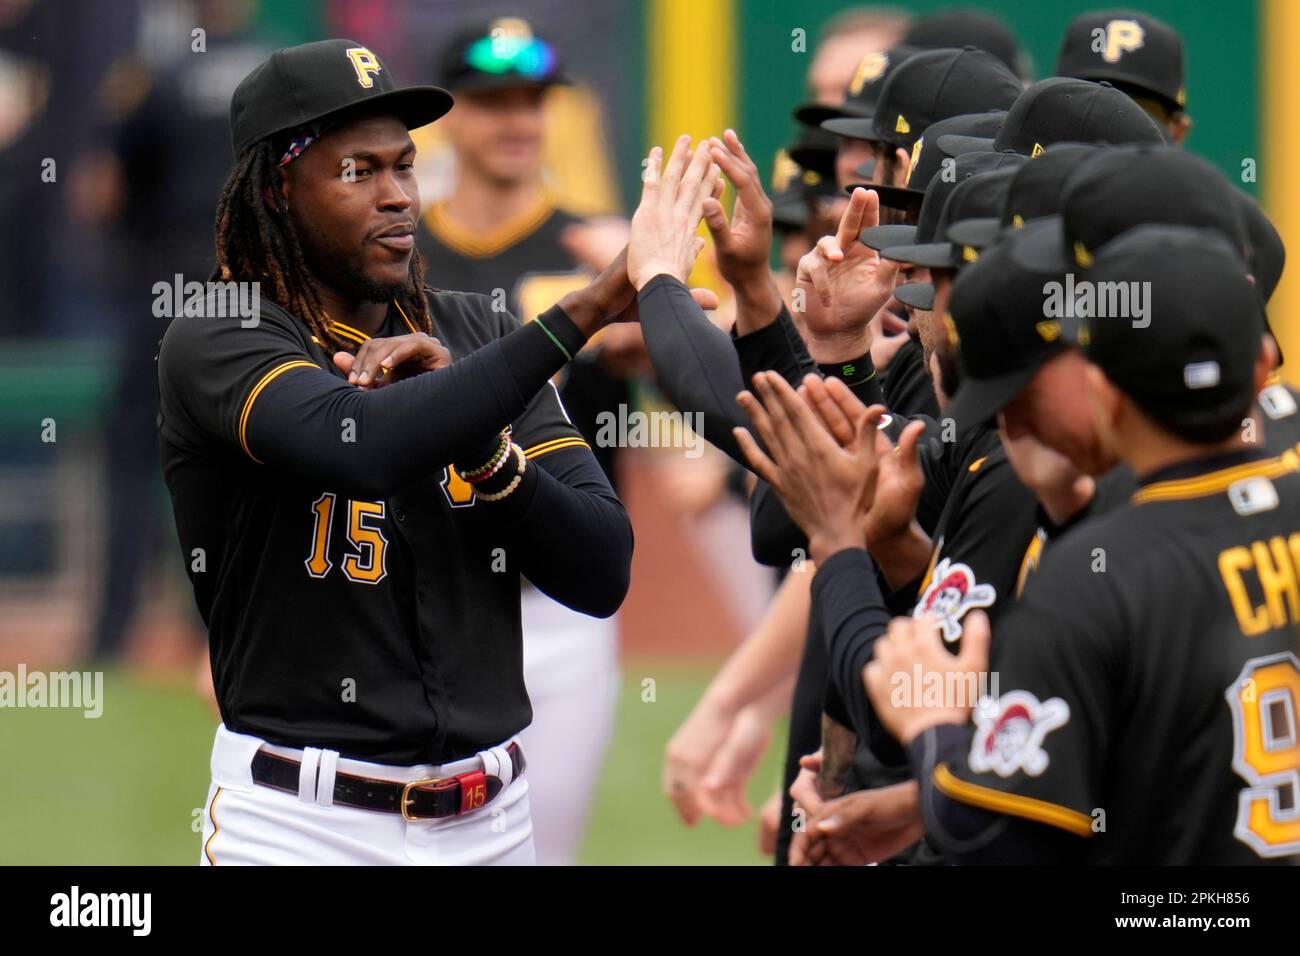 June 25, 2022: Pittsburgh Pirates shortstop Oneil Cruz (15) waits on deck  during the MLB game between Pittsburg Pirates and Tampa Bay Rays St.  Petersburg, FL. Tampa Bay Rays defeat the Pittsburg